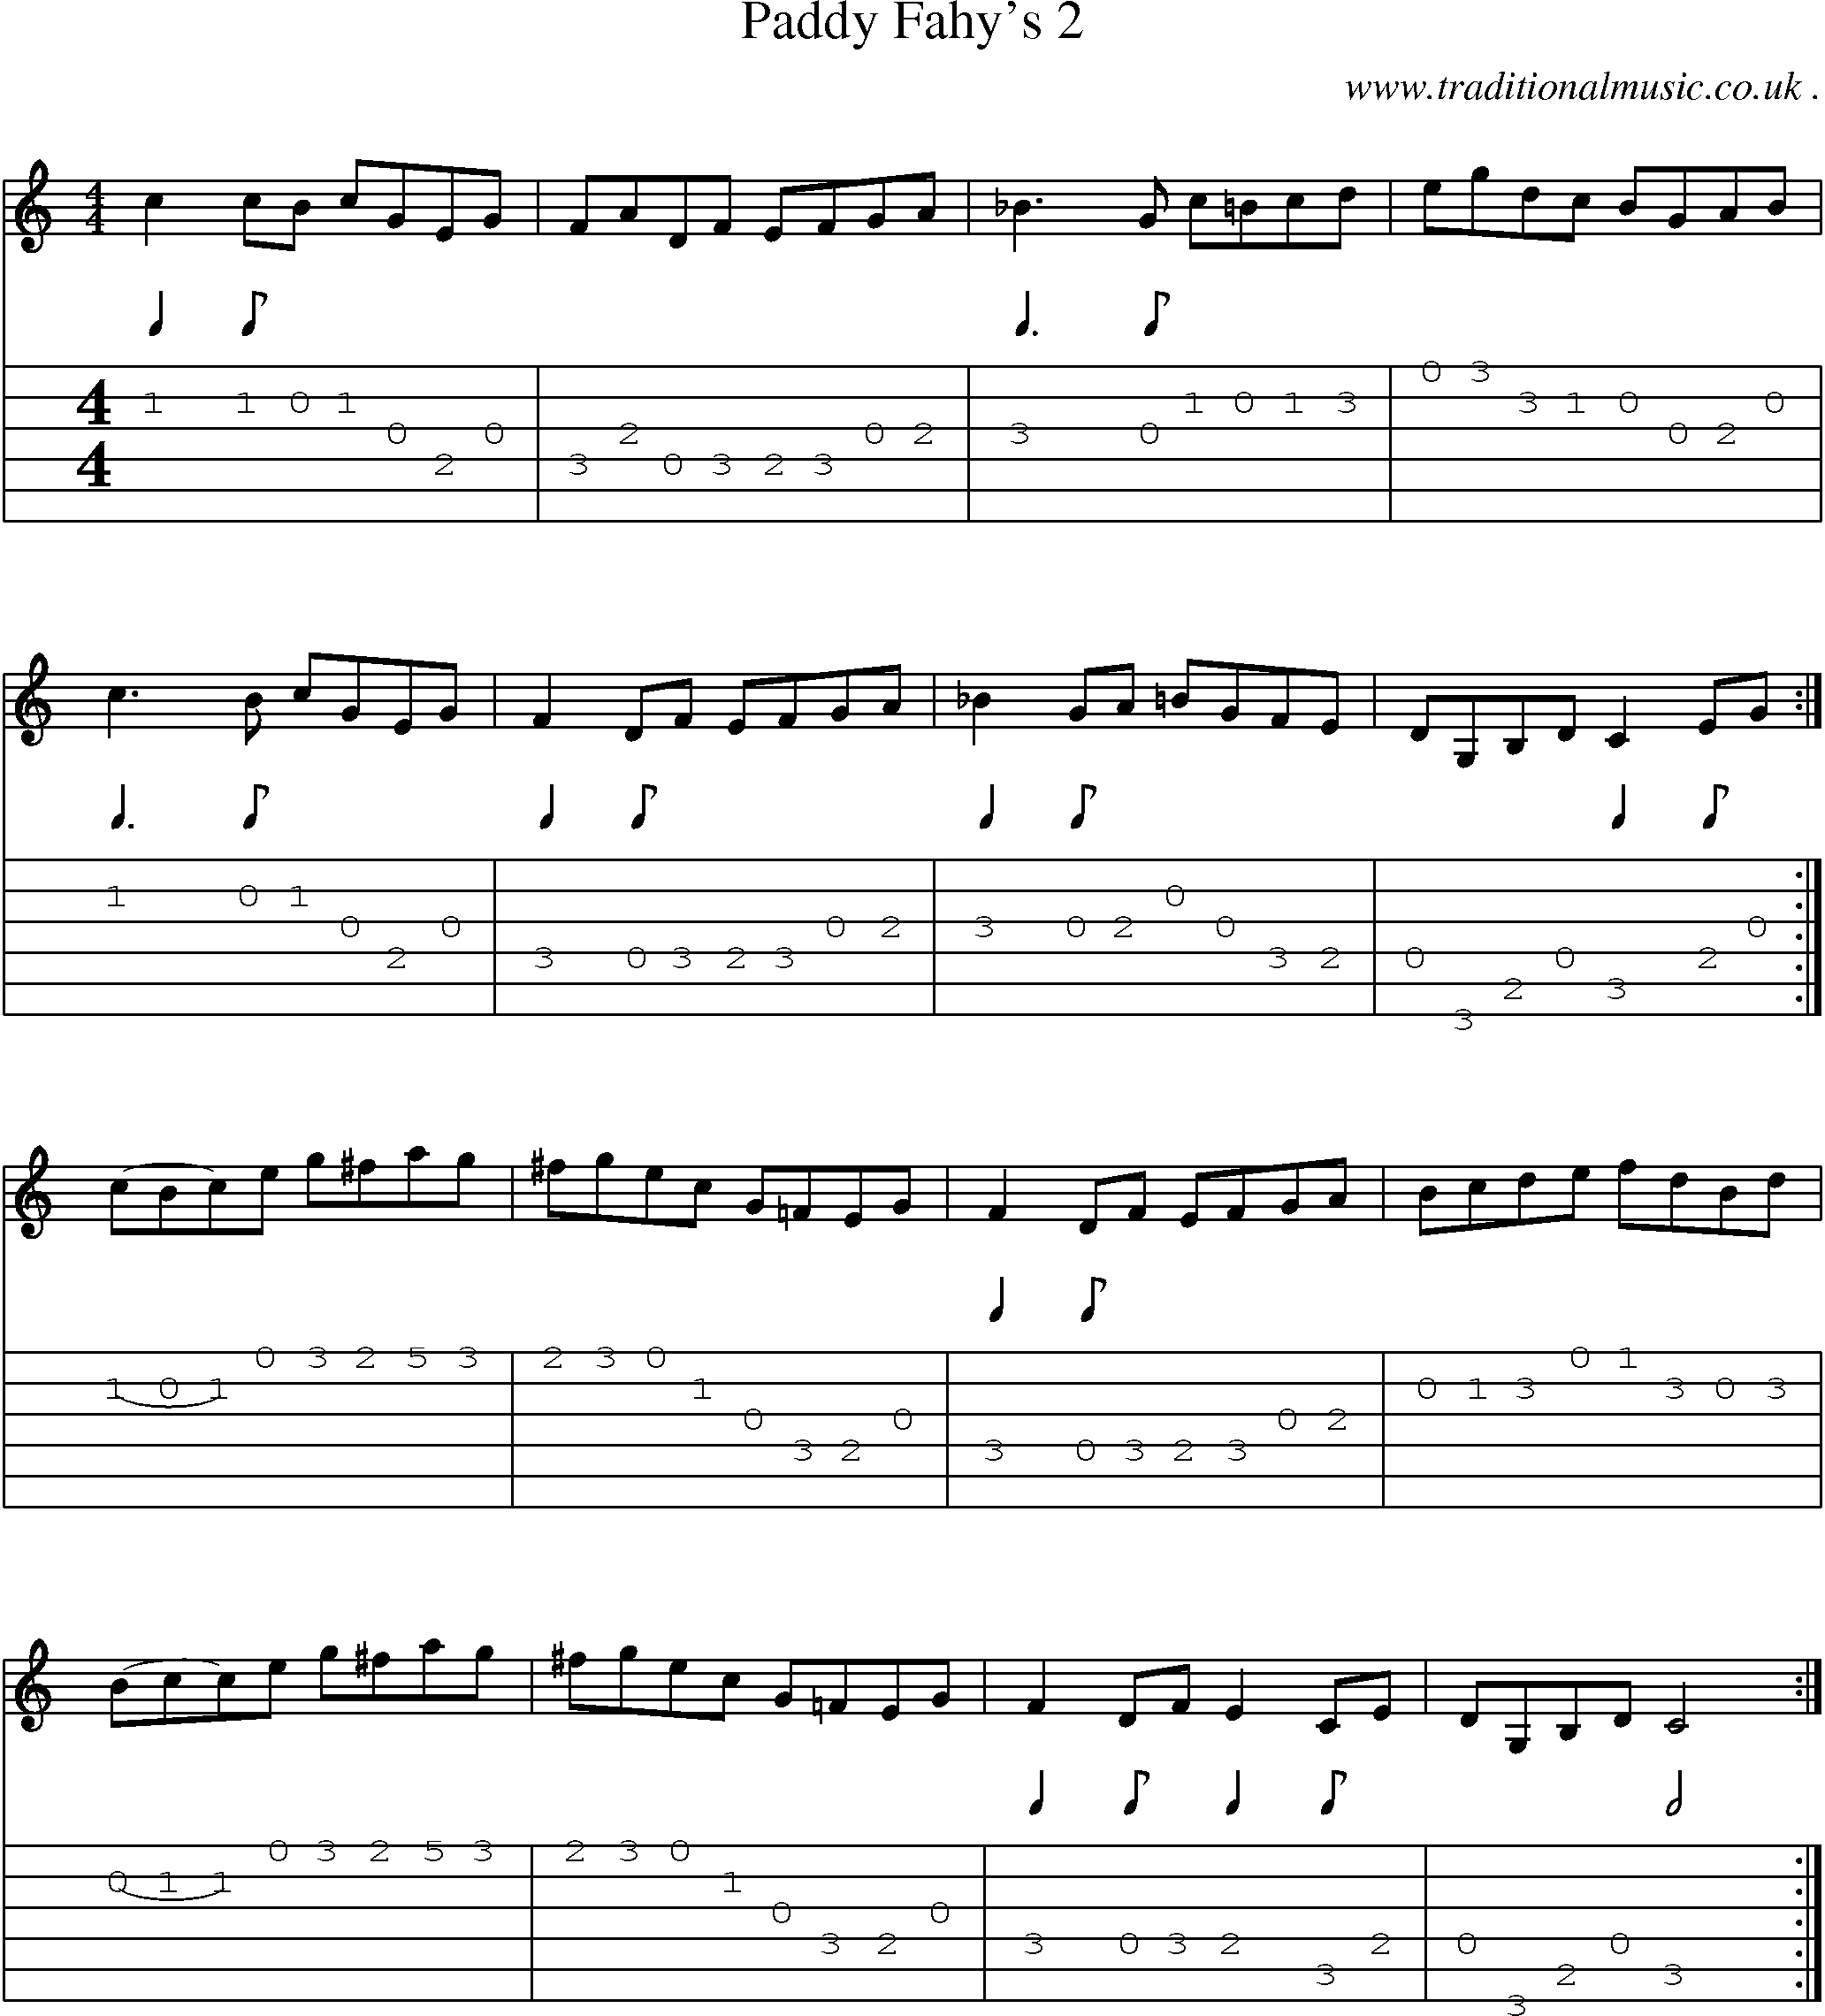 Sheet-Music and Guitar Tabs for Paddy Fahys 2